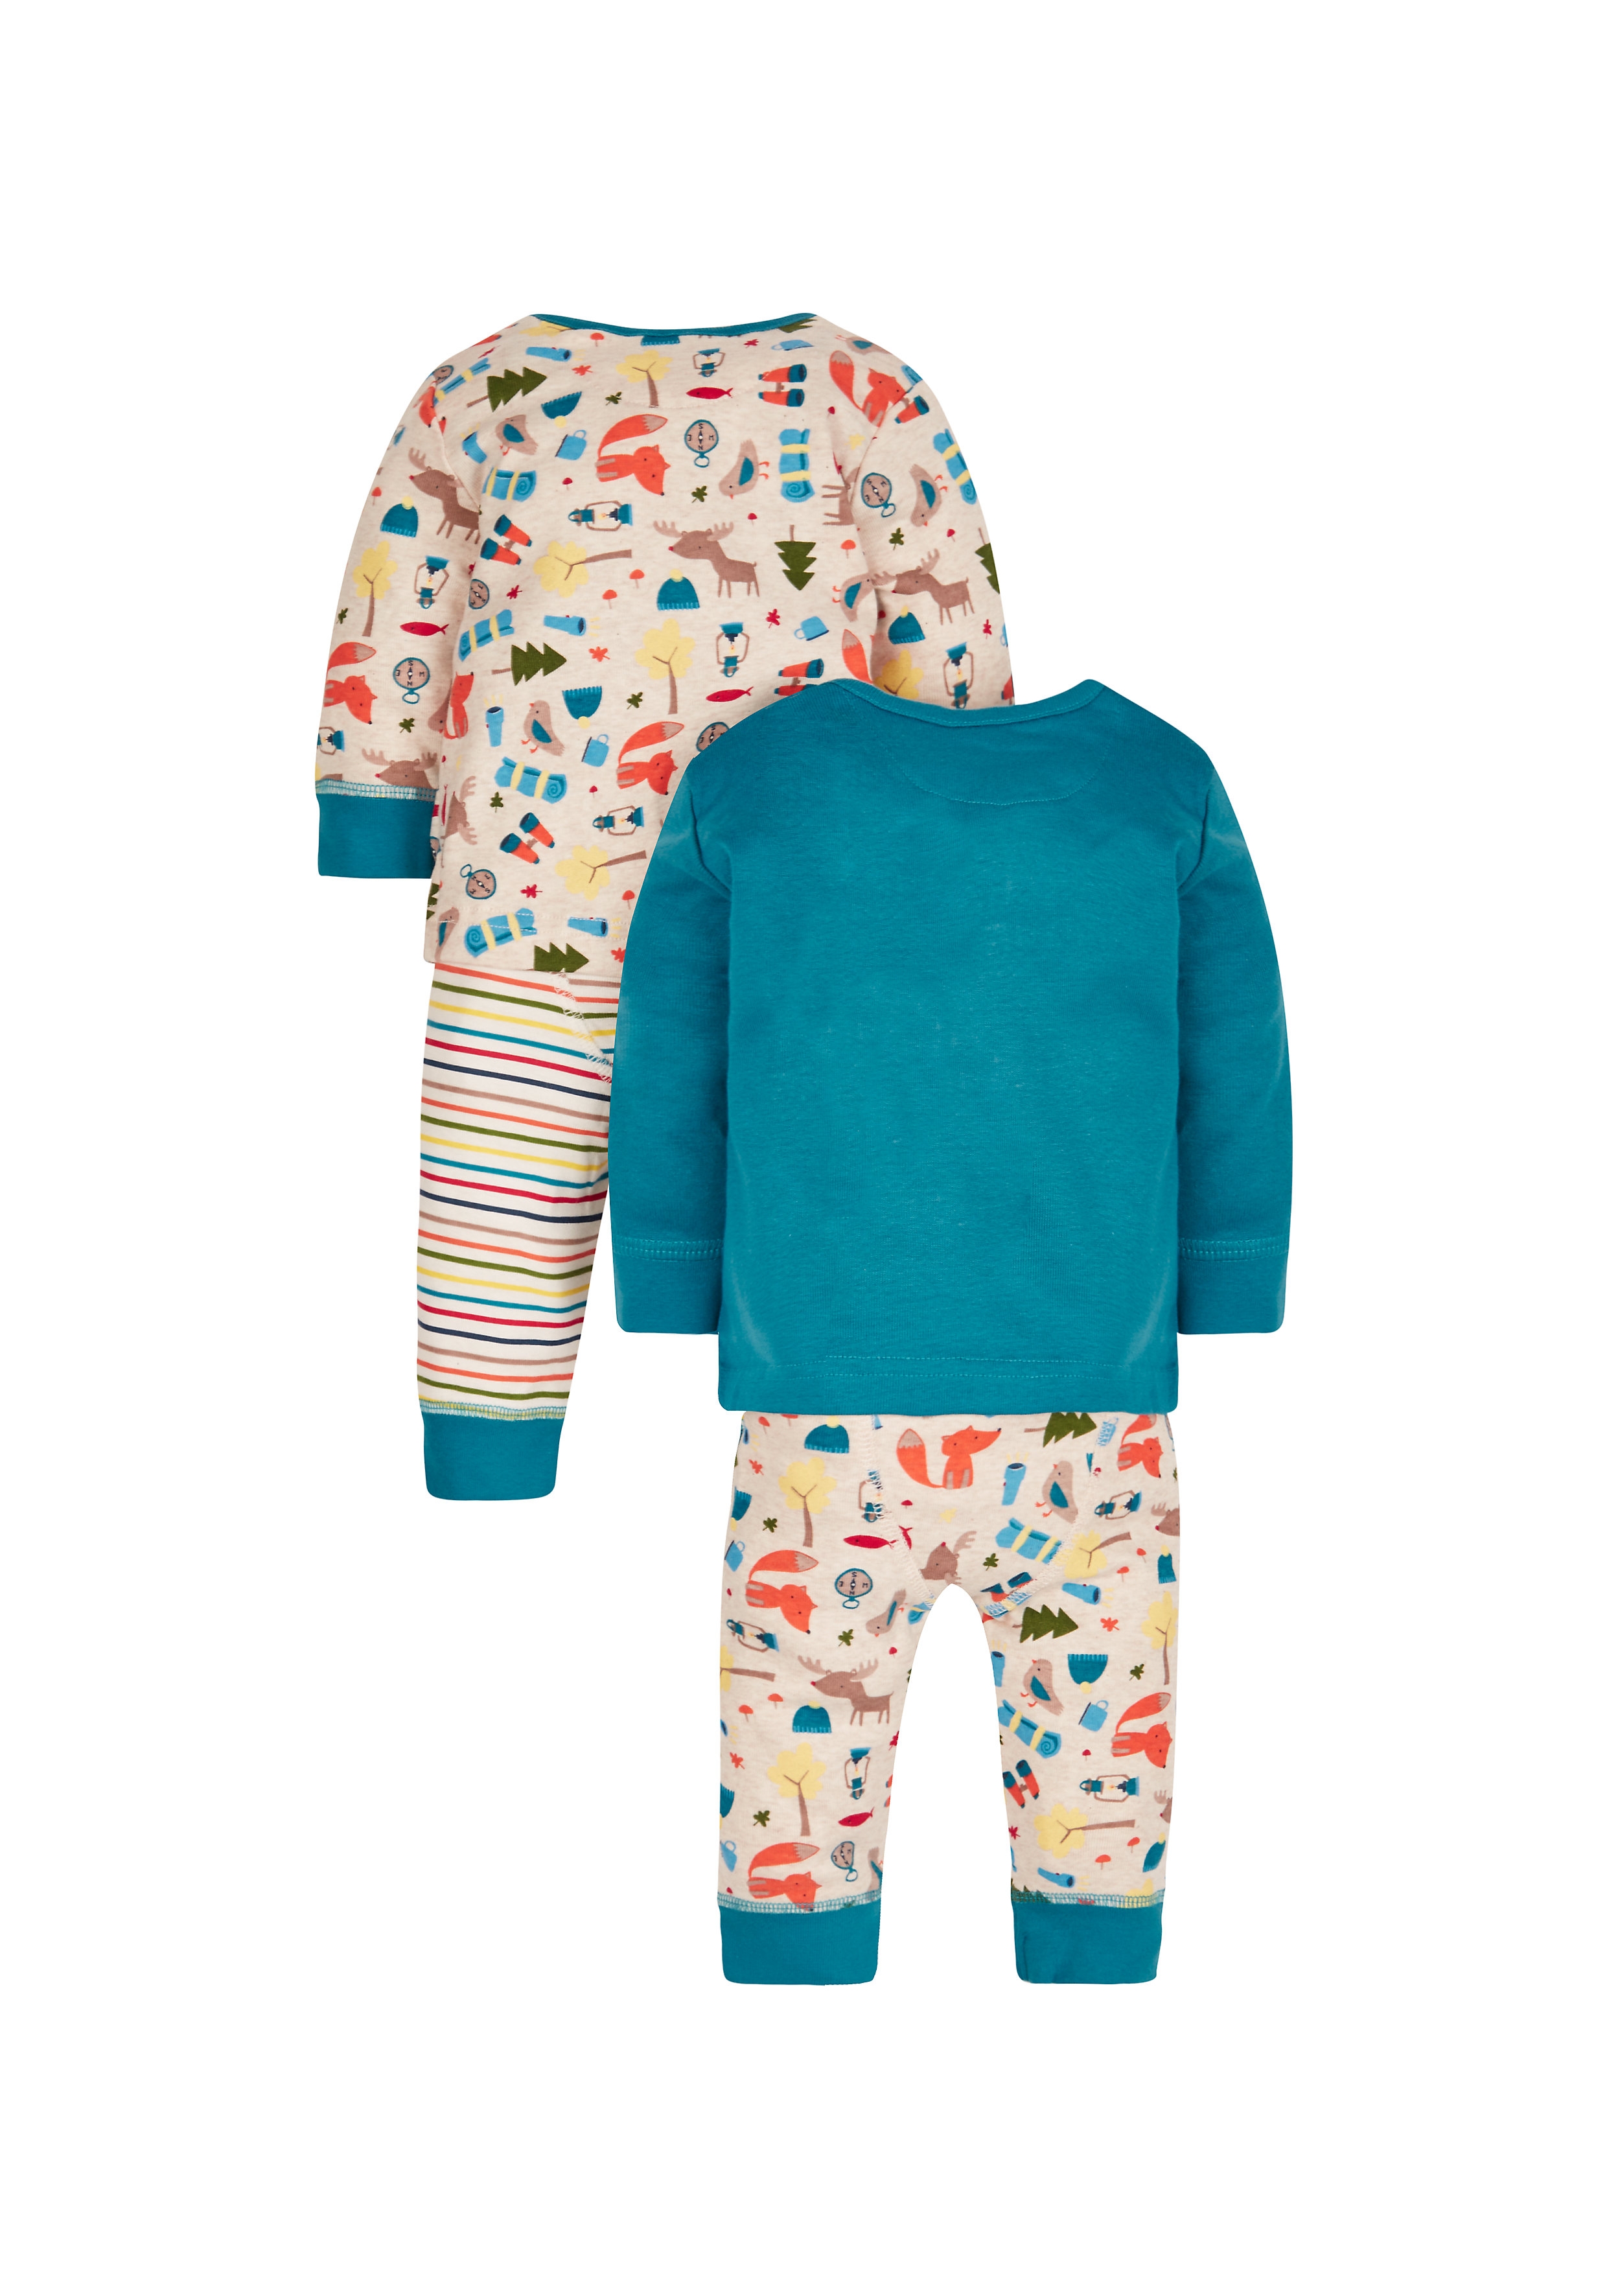 Mothercare | Boys Full Sleeves Pyjama Sets - Pack of 2 - Multicolor 1